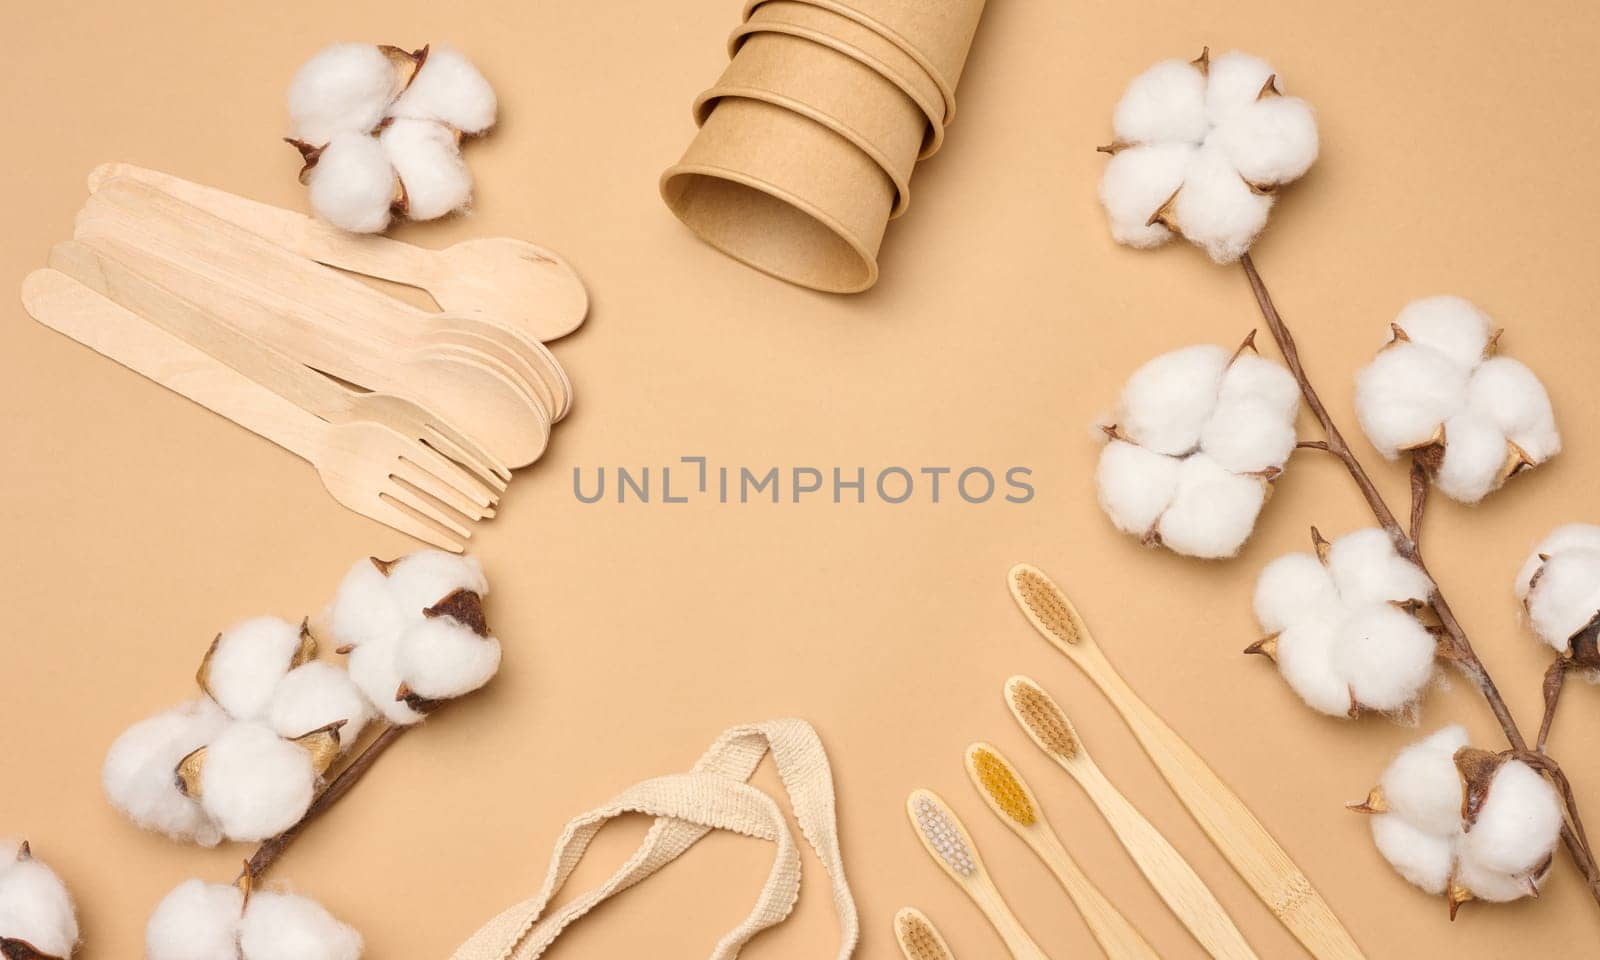 Cotton bag, wooden spoon and cups on a brown background. Waste recycling concept by ndanko